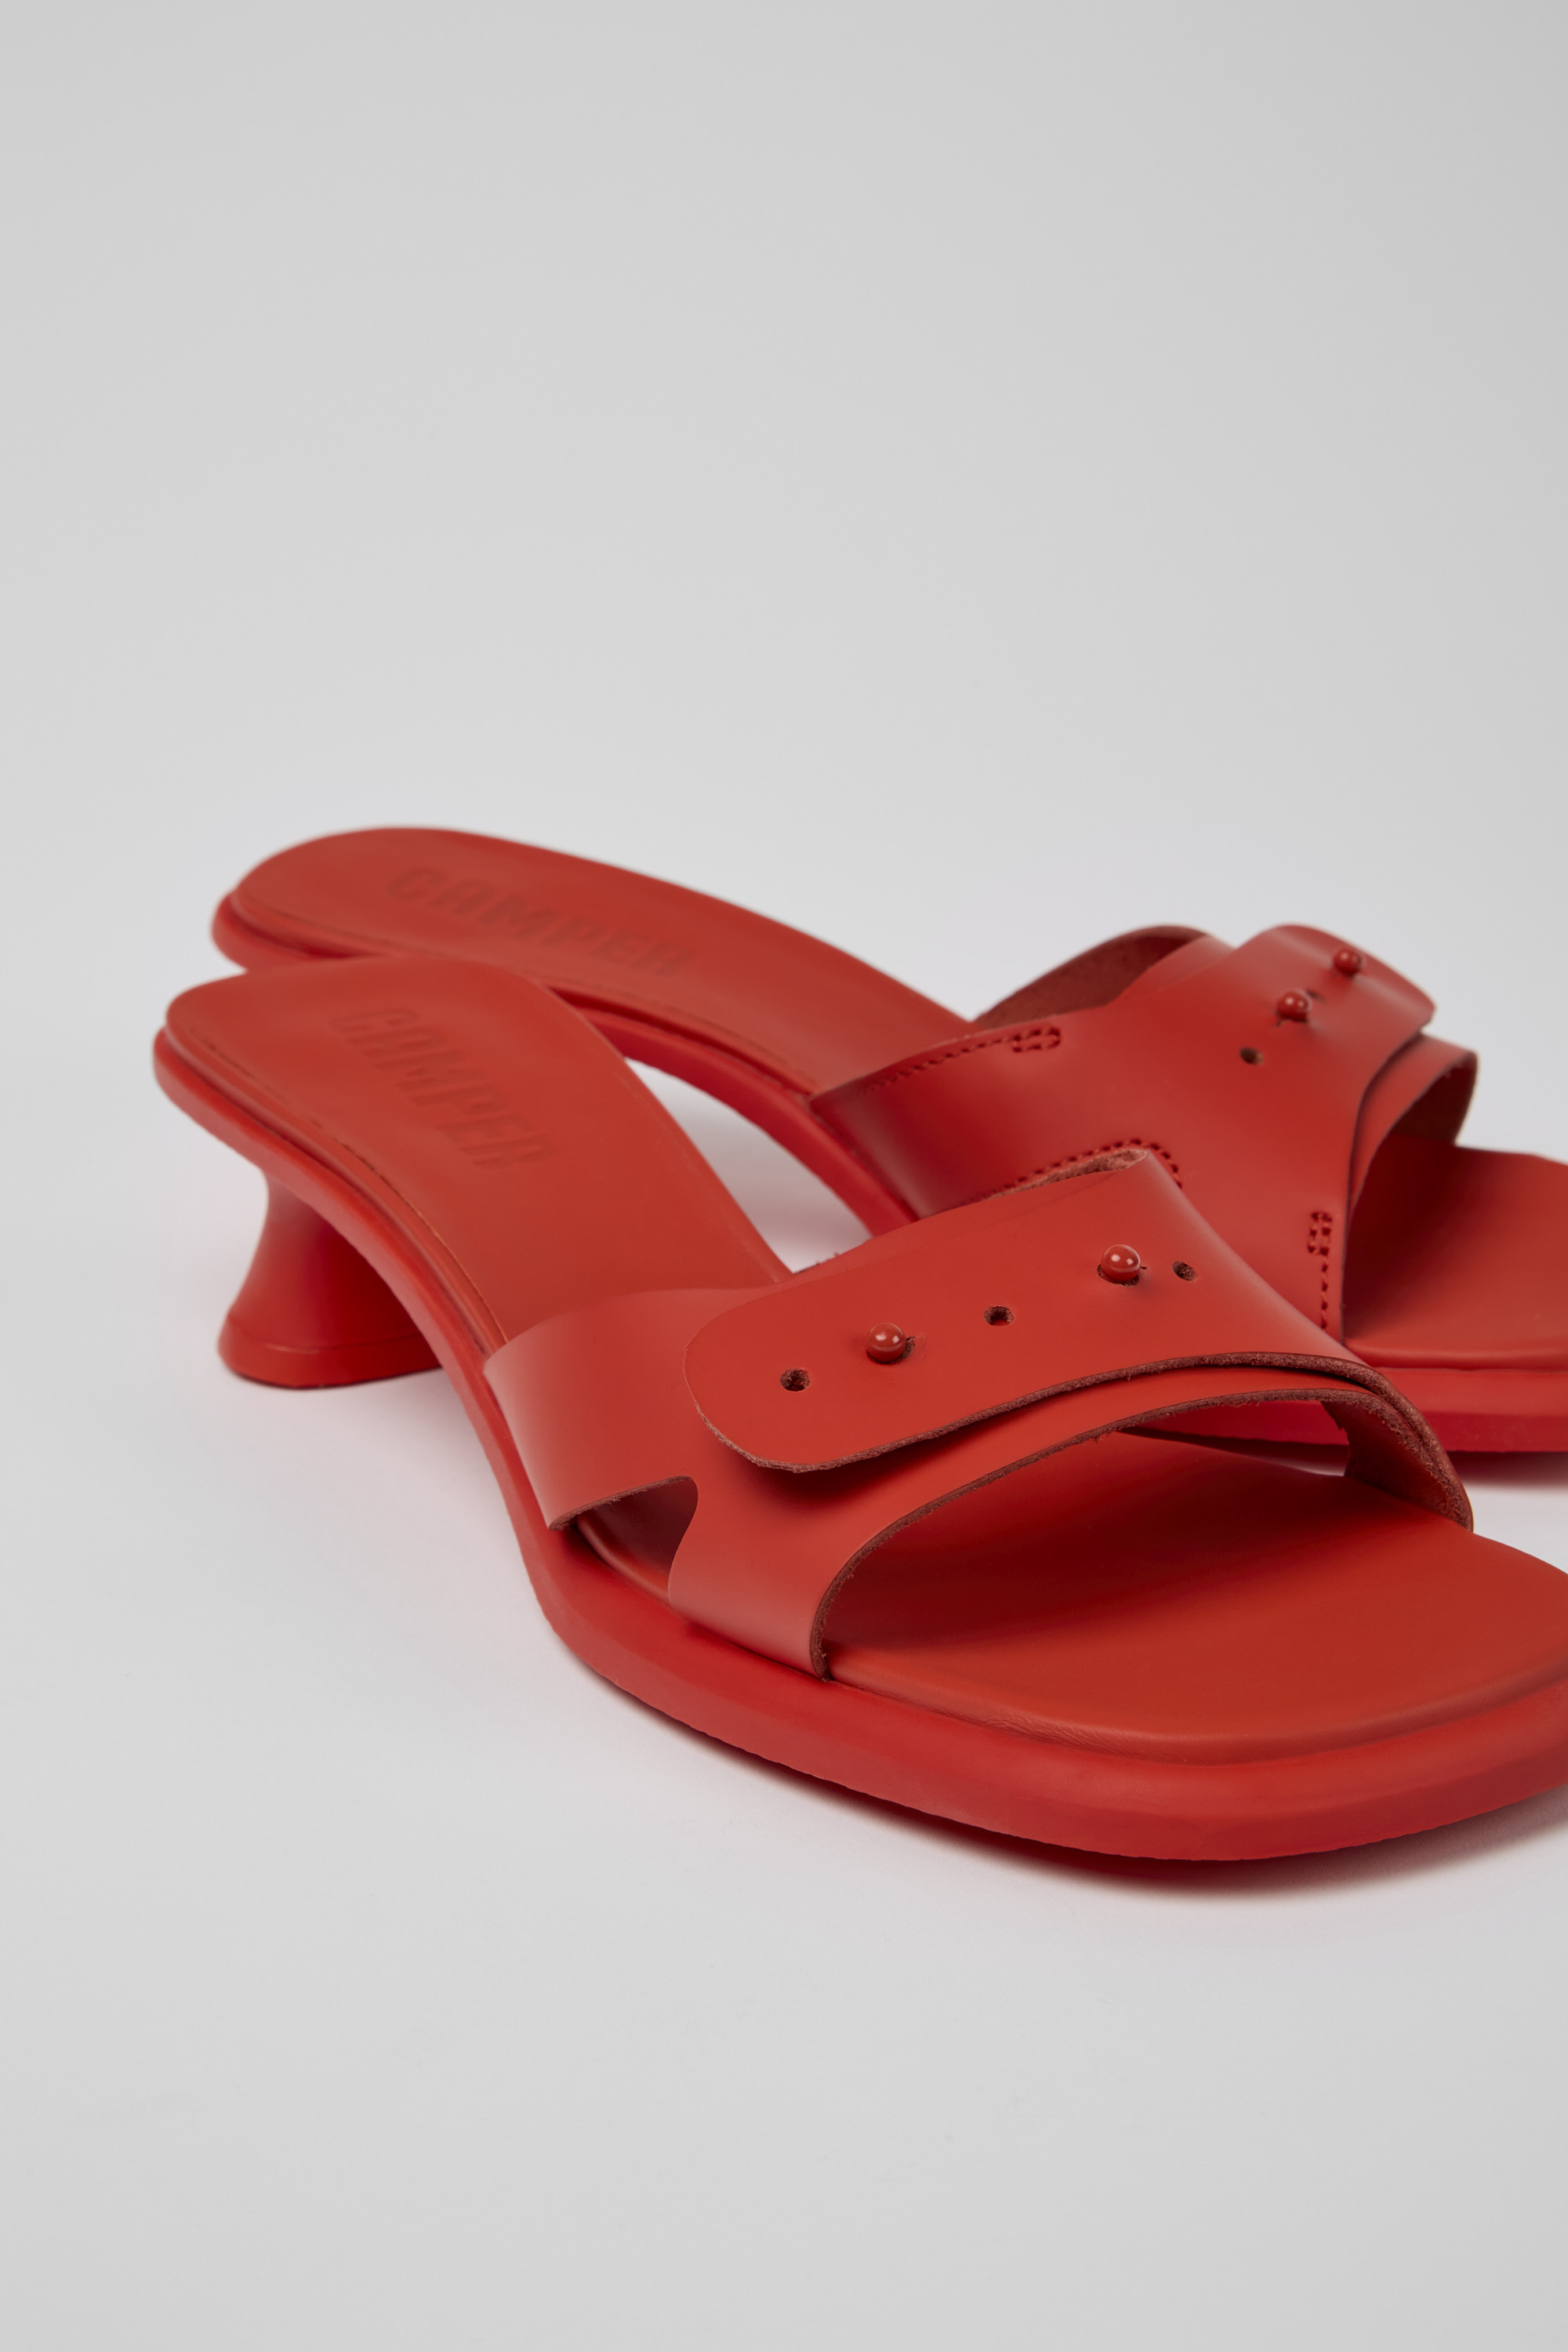 Dina Pink Sandals for Women - Autumn/Winter collection - Camper